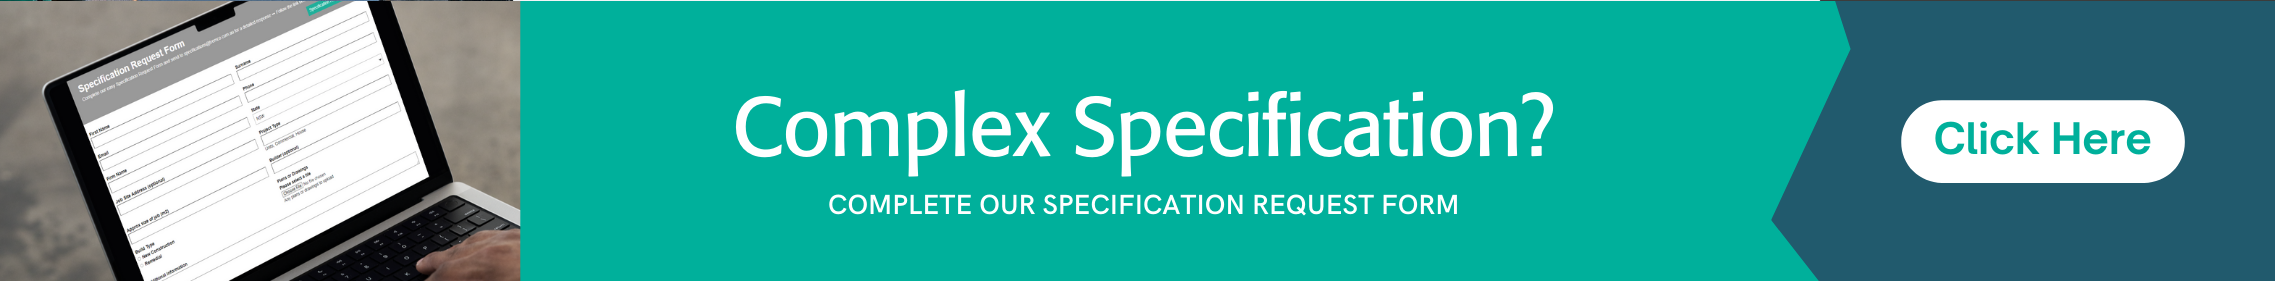 Let Us Help You Through the Specification Process